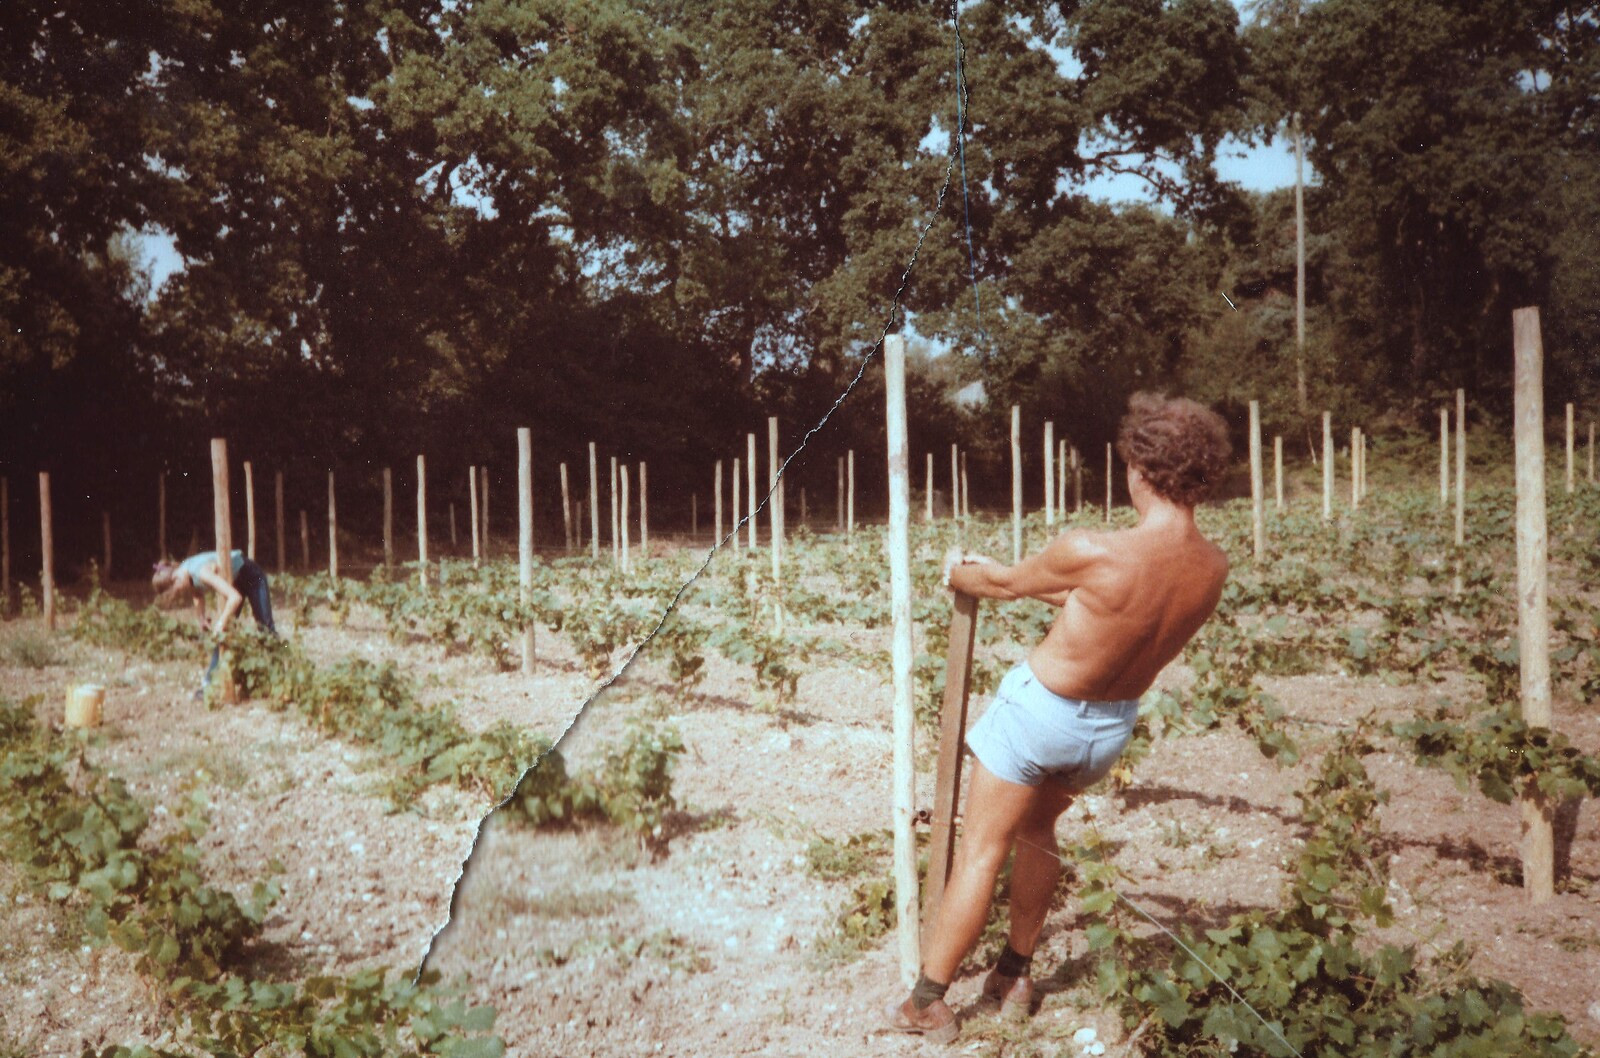 Mike pulls another wire from Constructing a Vineyard, Harrow Road, Bransgore, Dorset - 1st September 1981